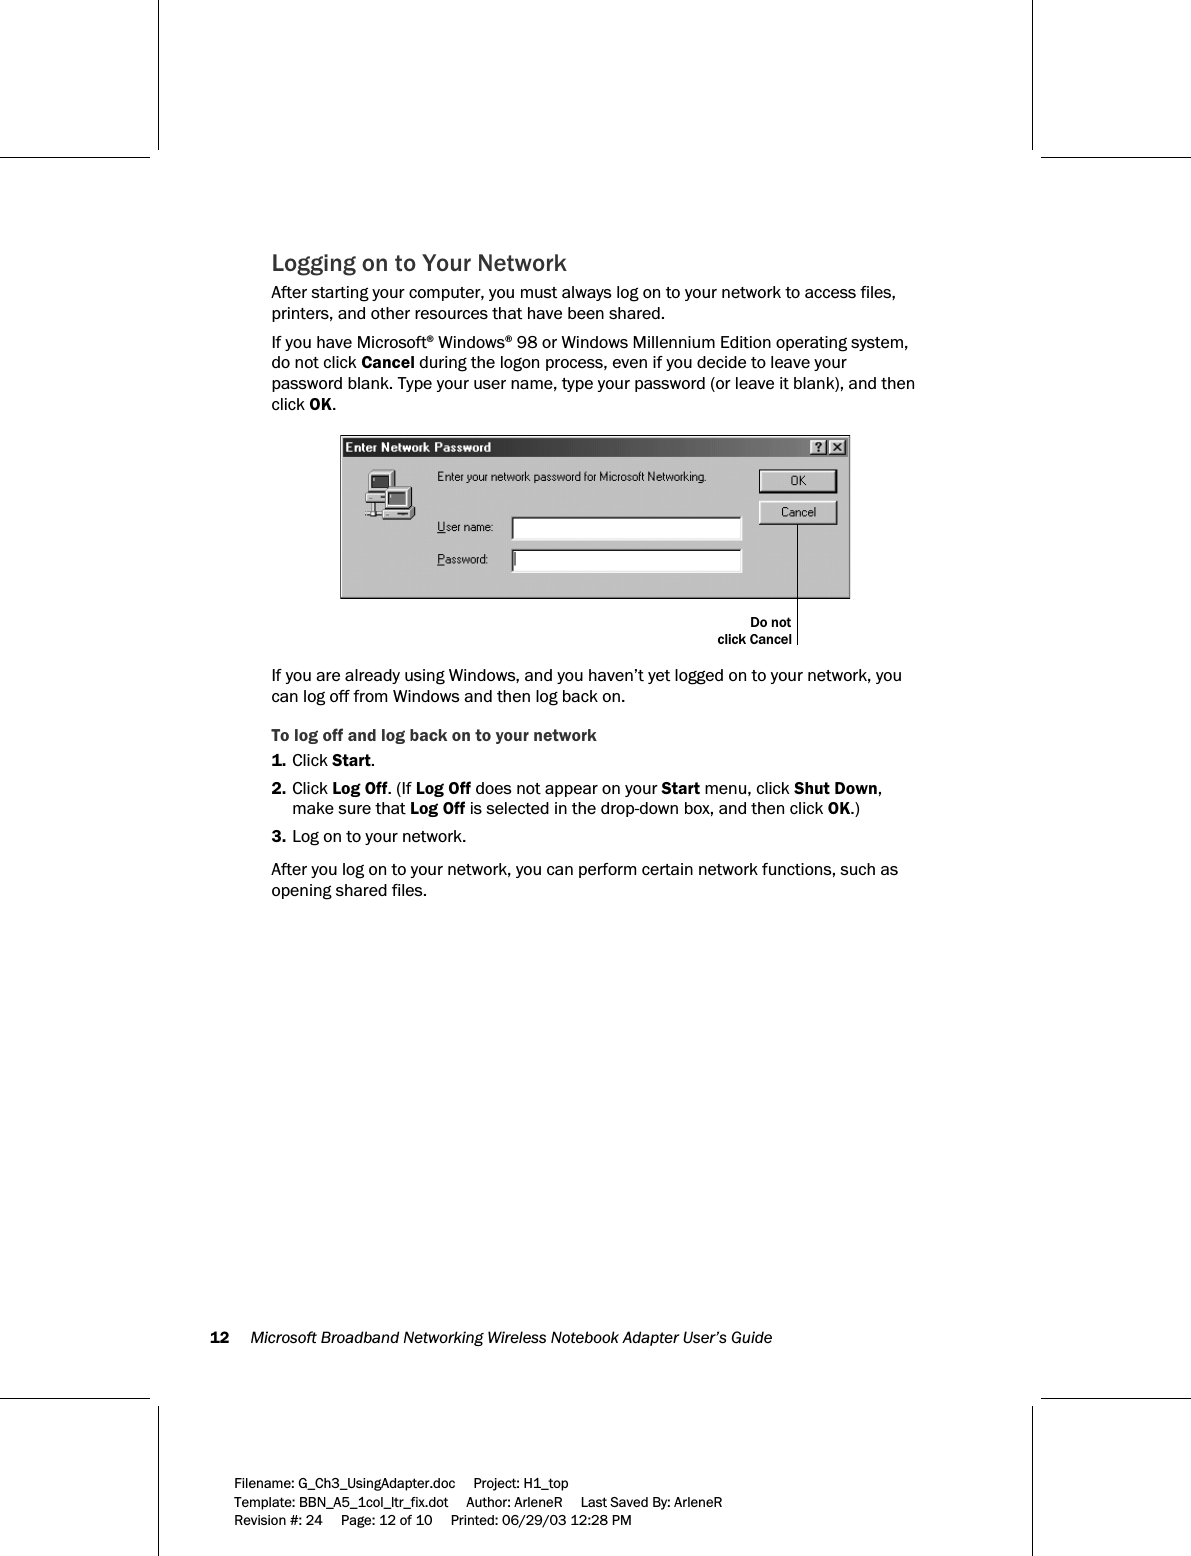 12     Microsoft Broadband Networking Wireless Notebook Adapter User’s Guide  Filename: G_Ch3_UsingAdapter.doc     Project: H1_top    Template: BBN_A5_1col_ltr_fix.dot     Author: ArleneR     Last Saved By: ArleneR Revision #: 24     Page: 12 of 10     Printed: 06/29/03 12:28 PM  Logging on to Your Network After starting your computer, you must always log on to your network to access files, printers, and other resources that have been shared.  If you have Microsoft® Windows® 98 or Windows Millennium Edition operating system, do not click Cancel during the logon process, even if you decide to leave your password blank. Type your user name, type your password (or leave it blank), and then click OK.  Do notclick Cancel  If you are already using Windows, and you haven’t yet logged on to your network, you can log off from Windows and then log back on. To log off and log back on to your network 1. Click Start. 2. Click Log Off. (If Log Off does not appear on your Start menu, click Shut Down, make sure that Log Off is selected in the drop-down box, and then click OK.) 3. Log on to your network.  After you log on to your network, you can perform certain network functions, such as opening shared files. 